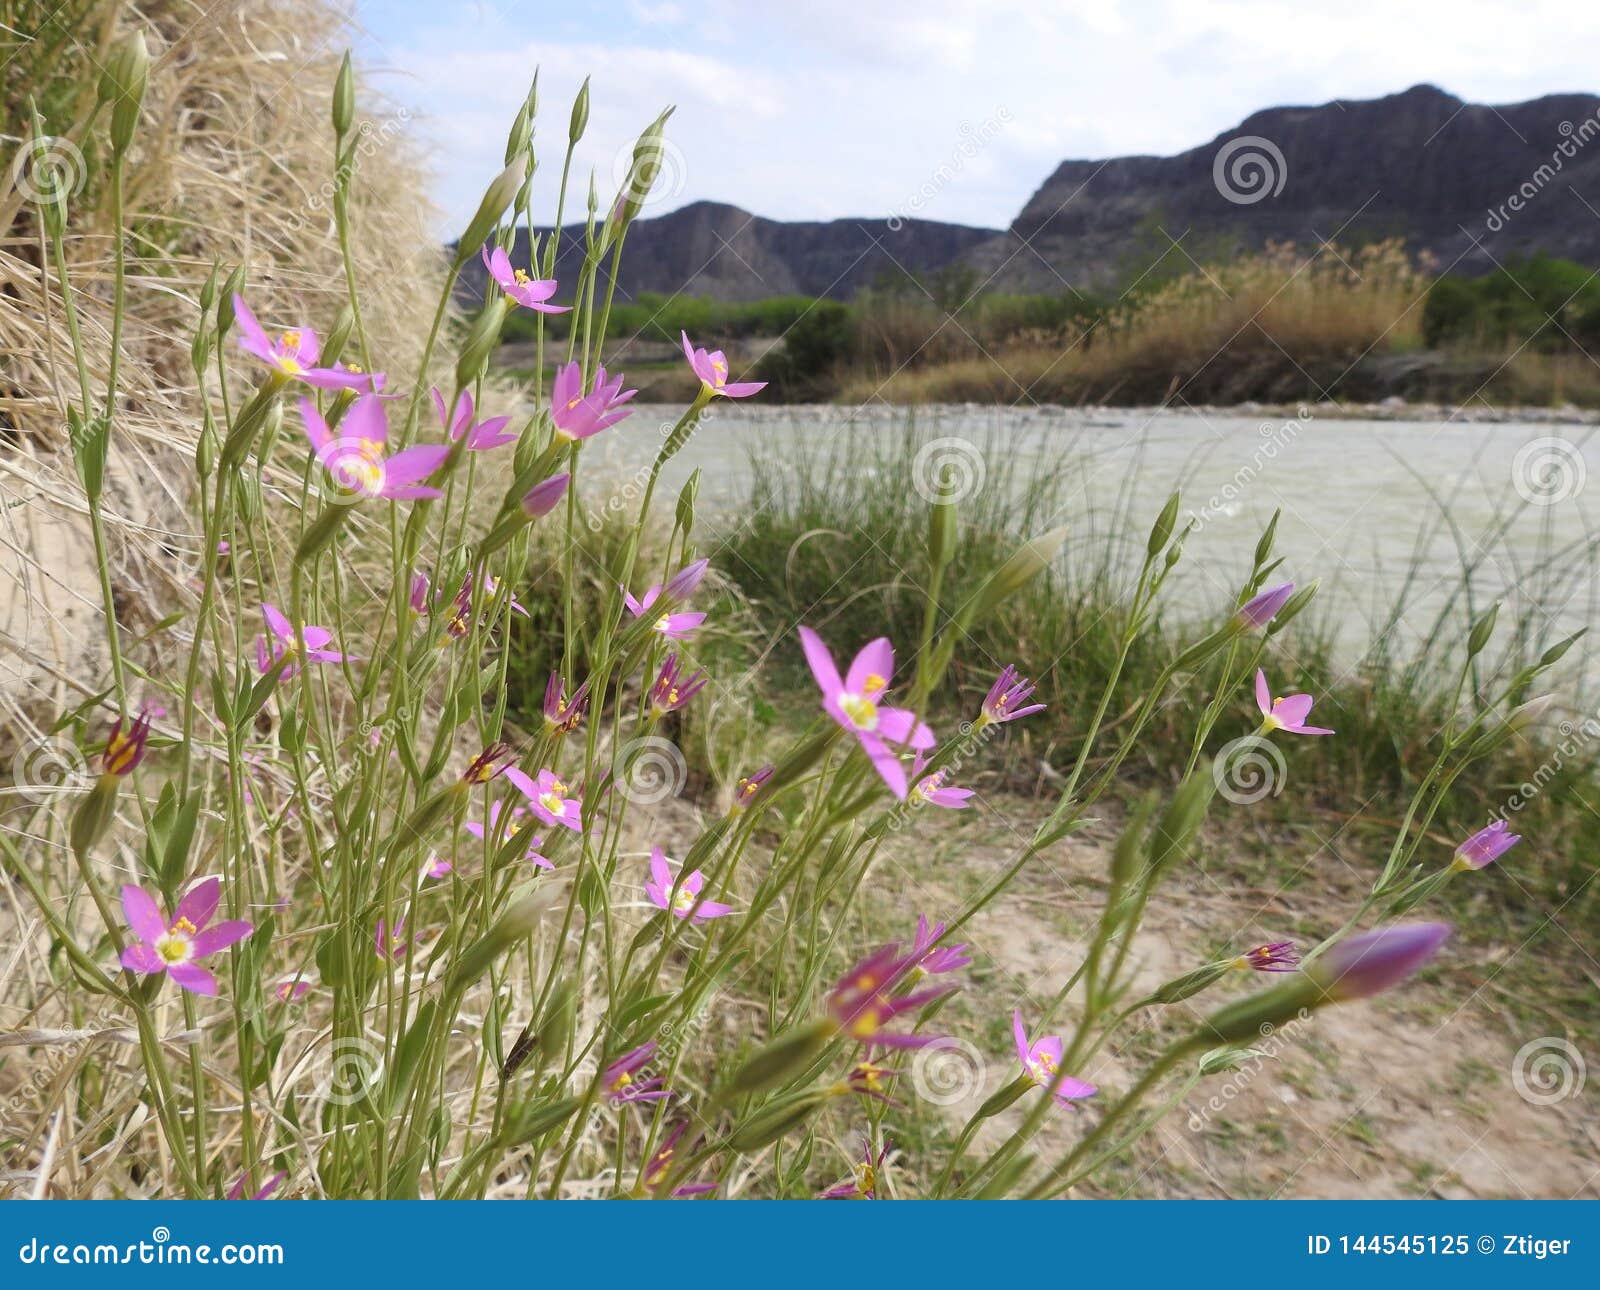 pink centaury flowers on the bank of the rio grande river